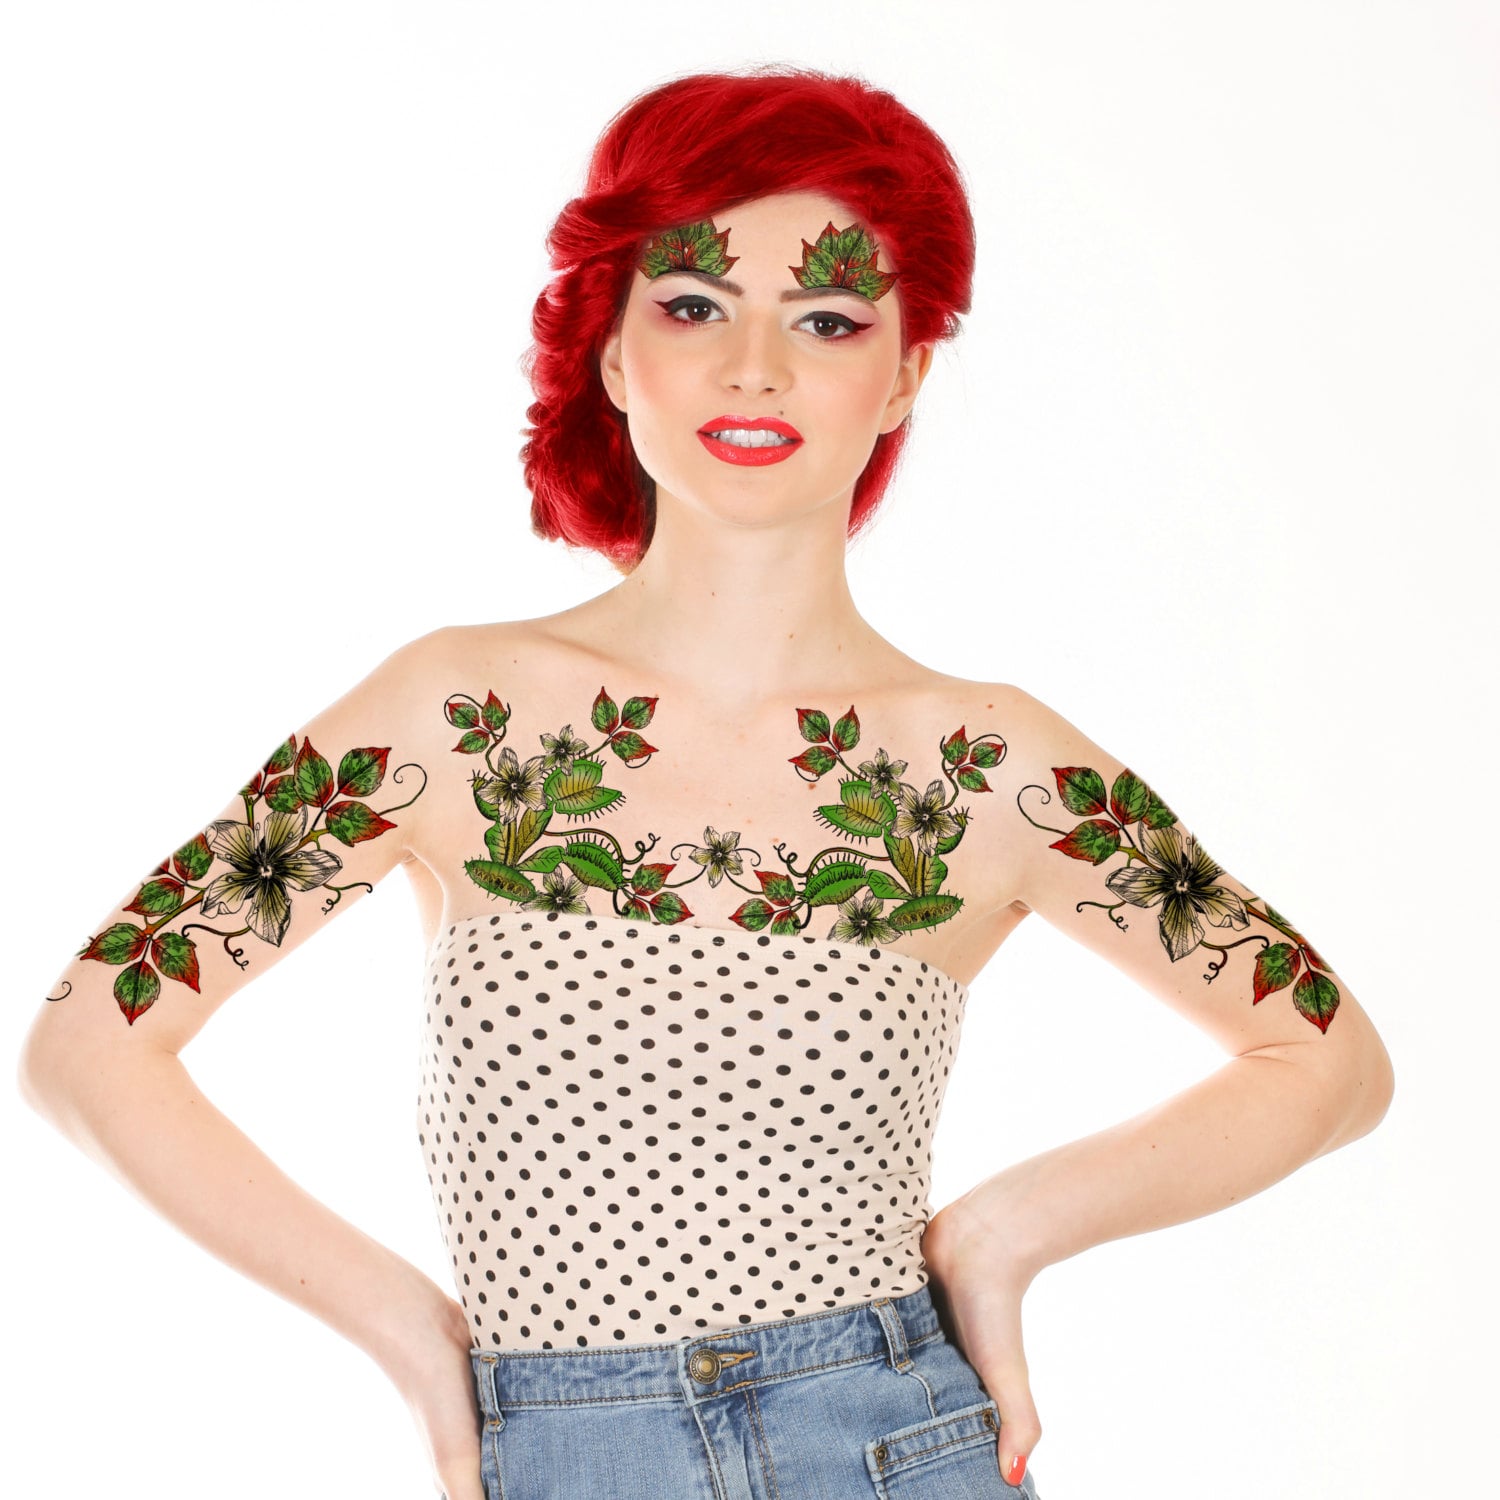 11 Poison Ivy Tattoo Ideas You Have To See To Believe  alexie